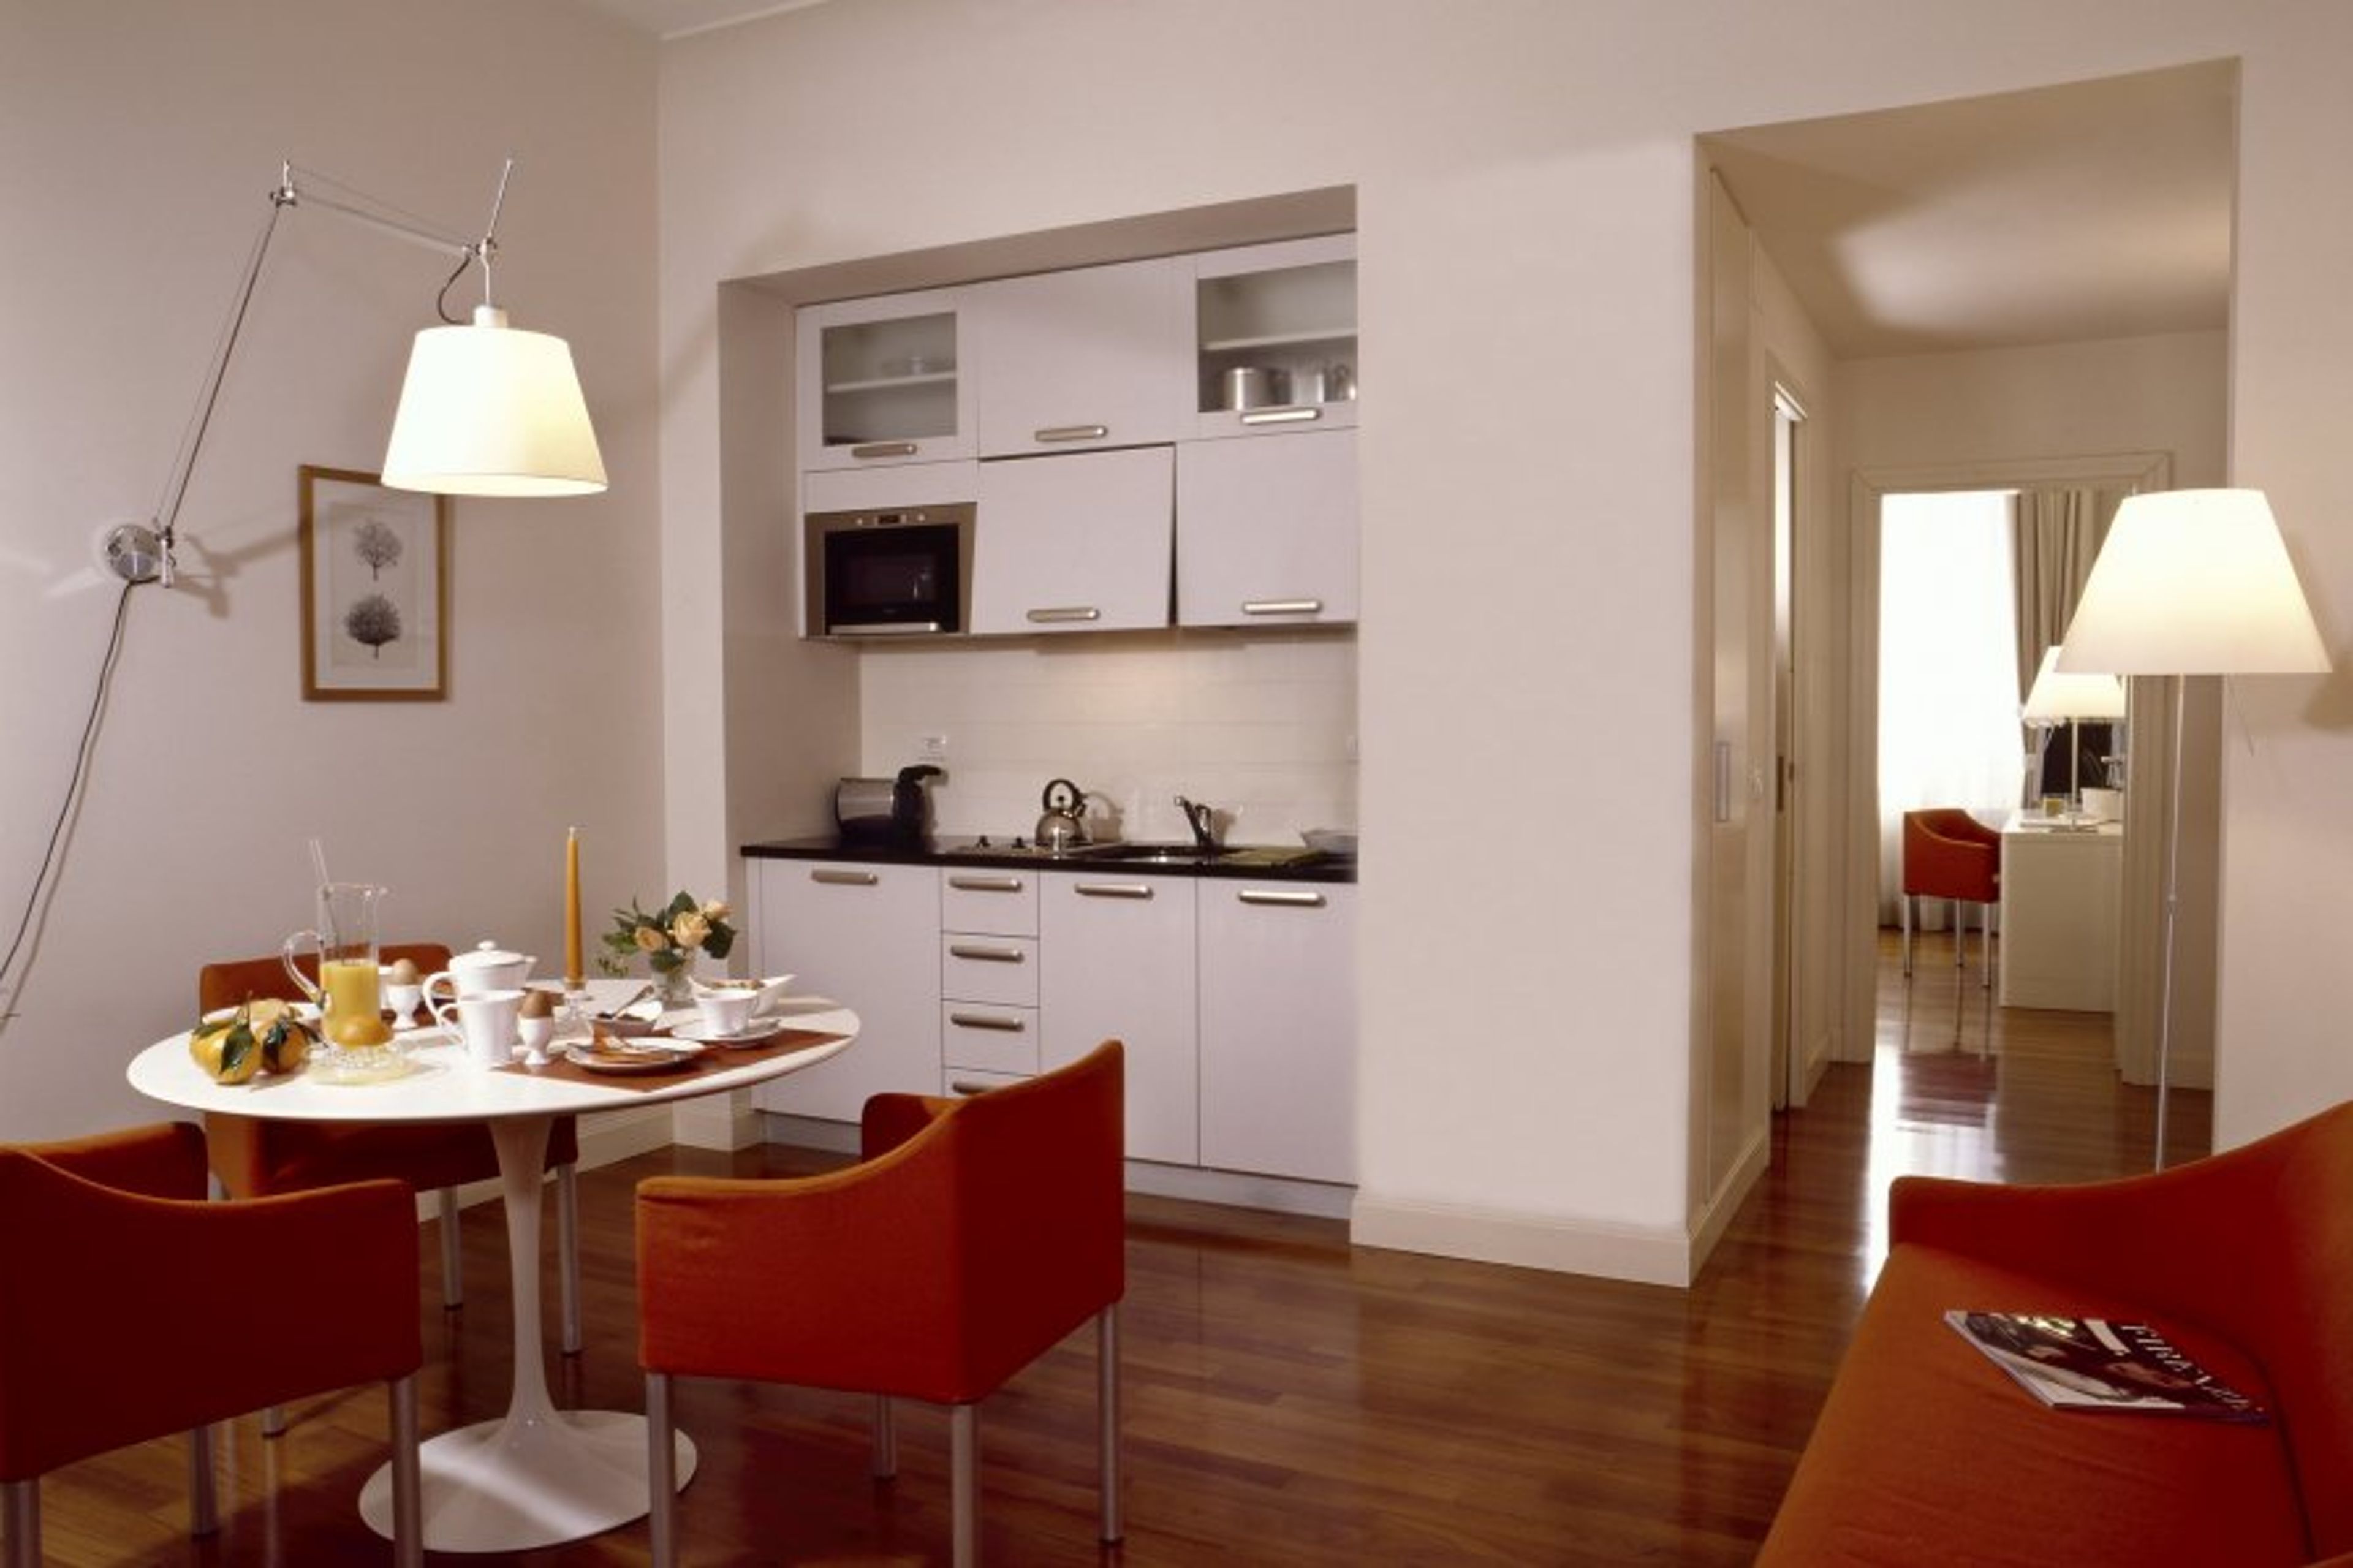 Dining room with kitchen and living area